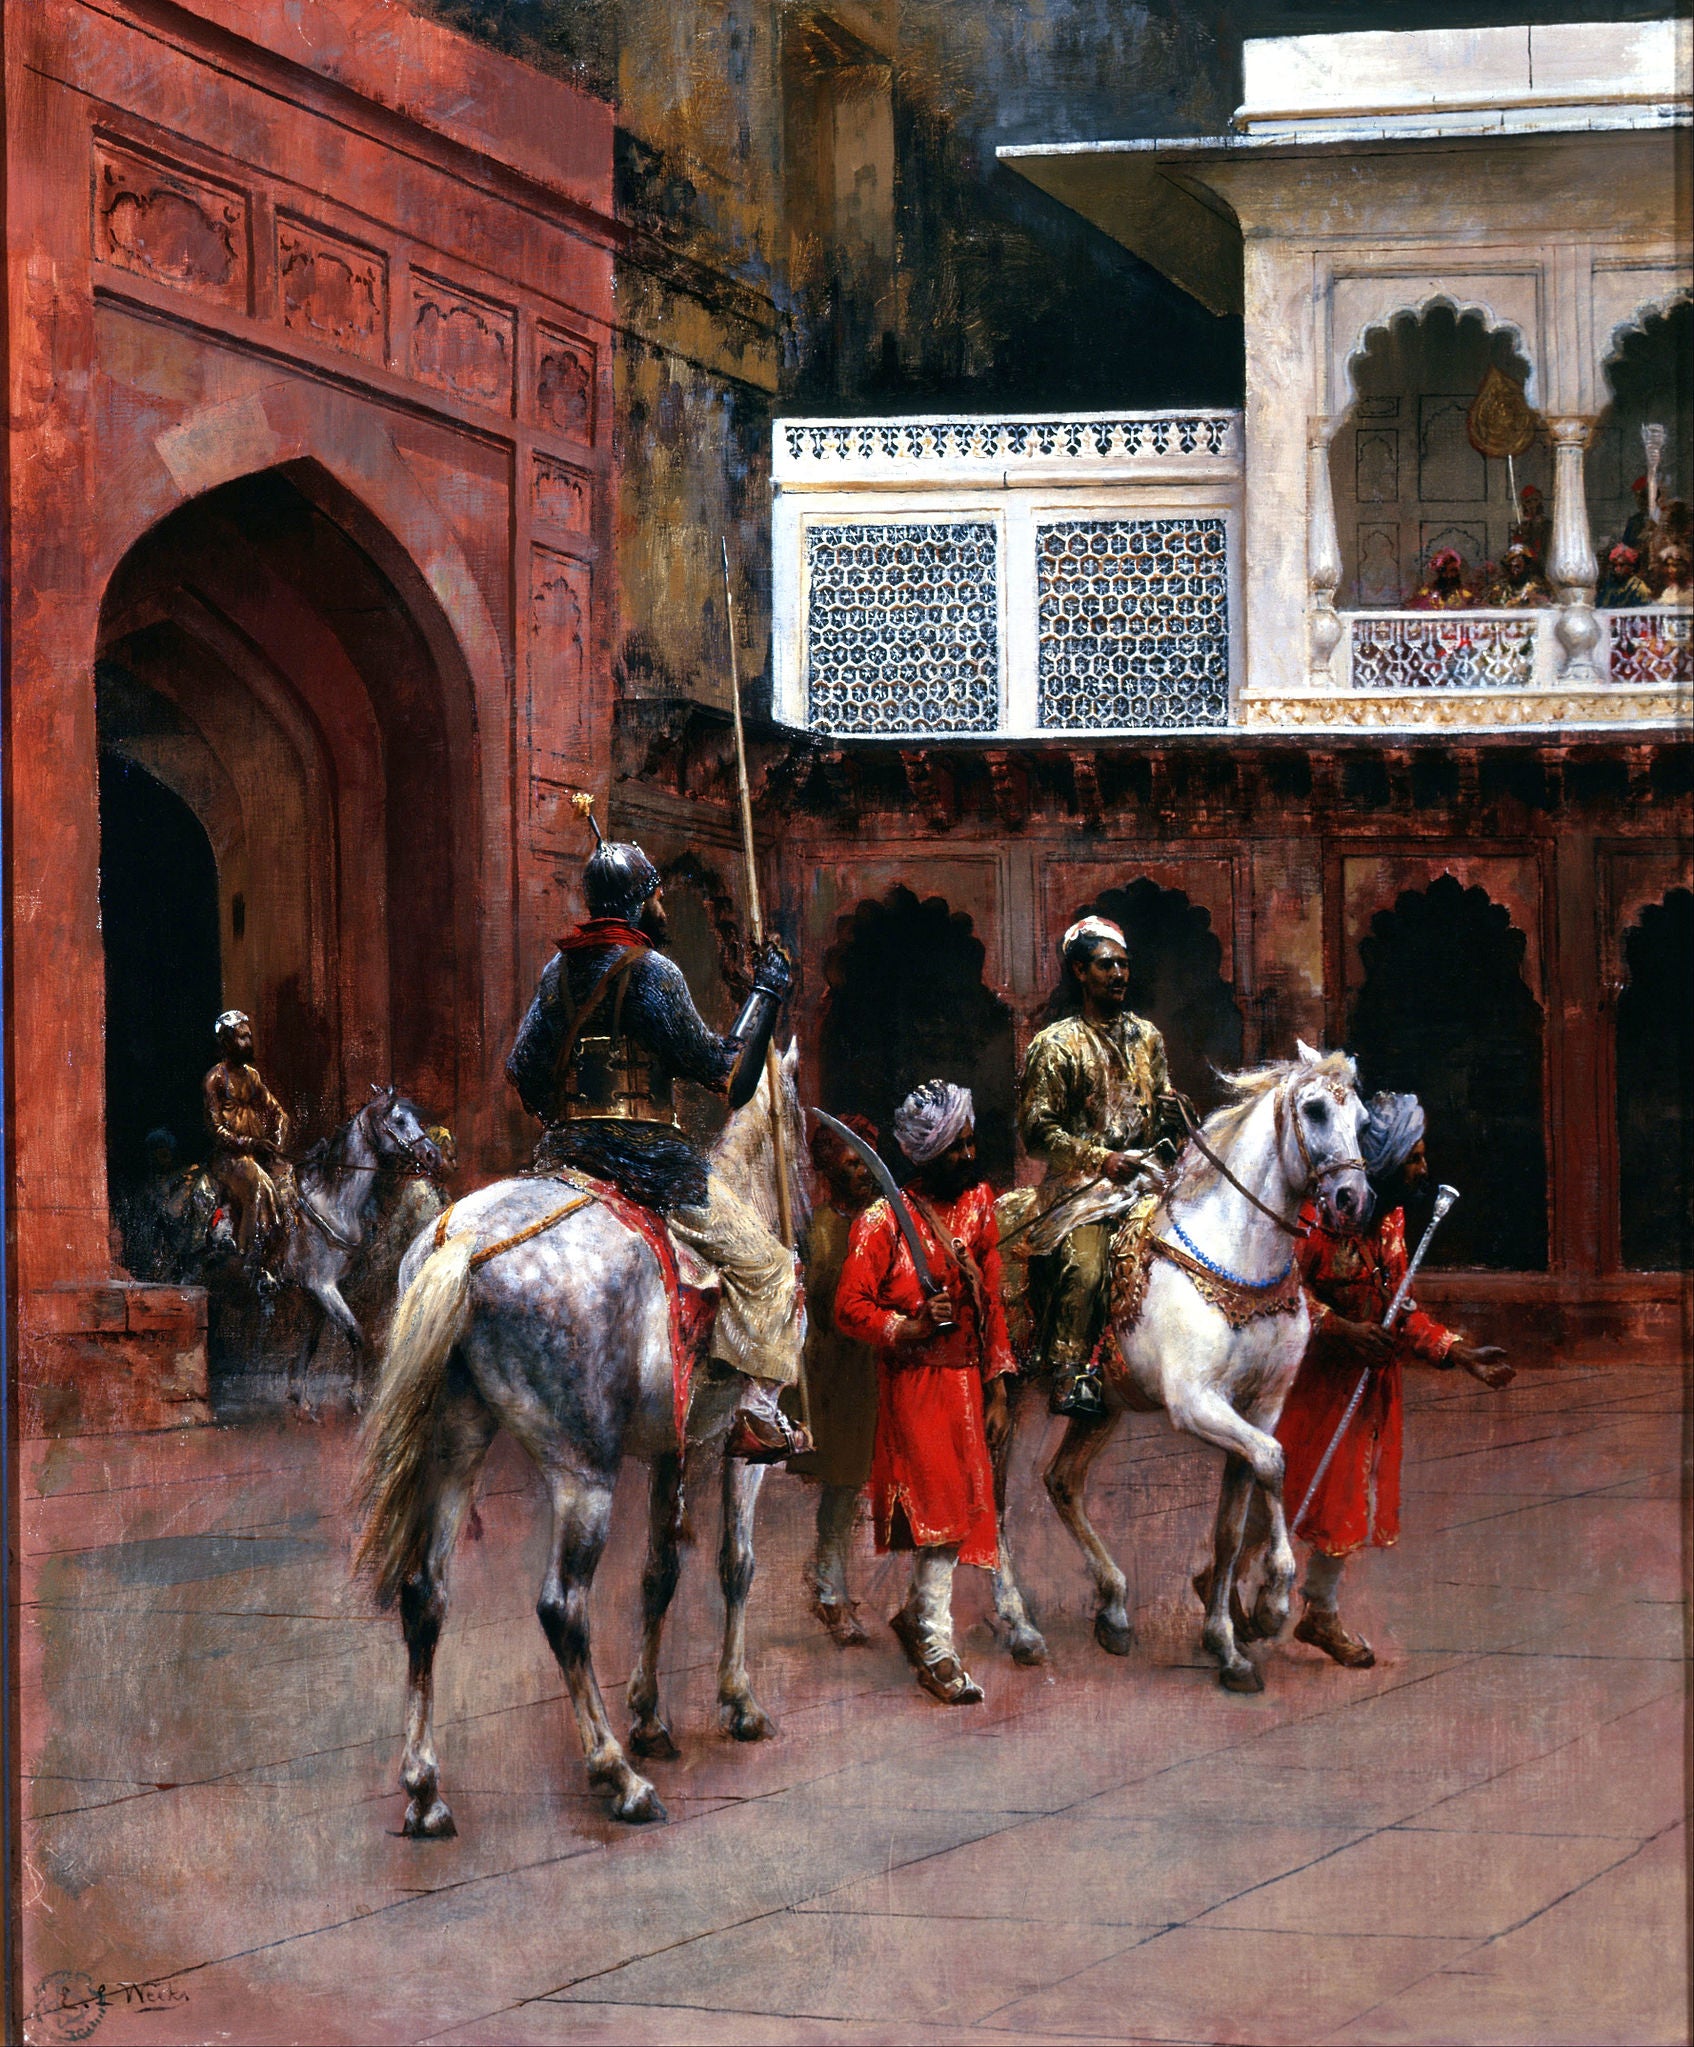 Prince indien, Palais d'Agra - Edwin Lord Weeks